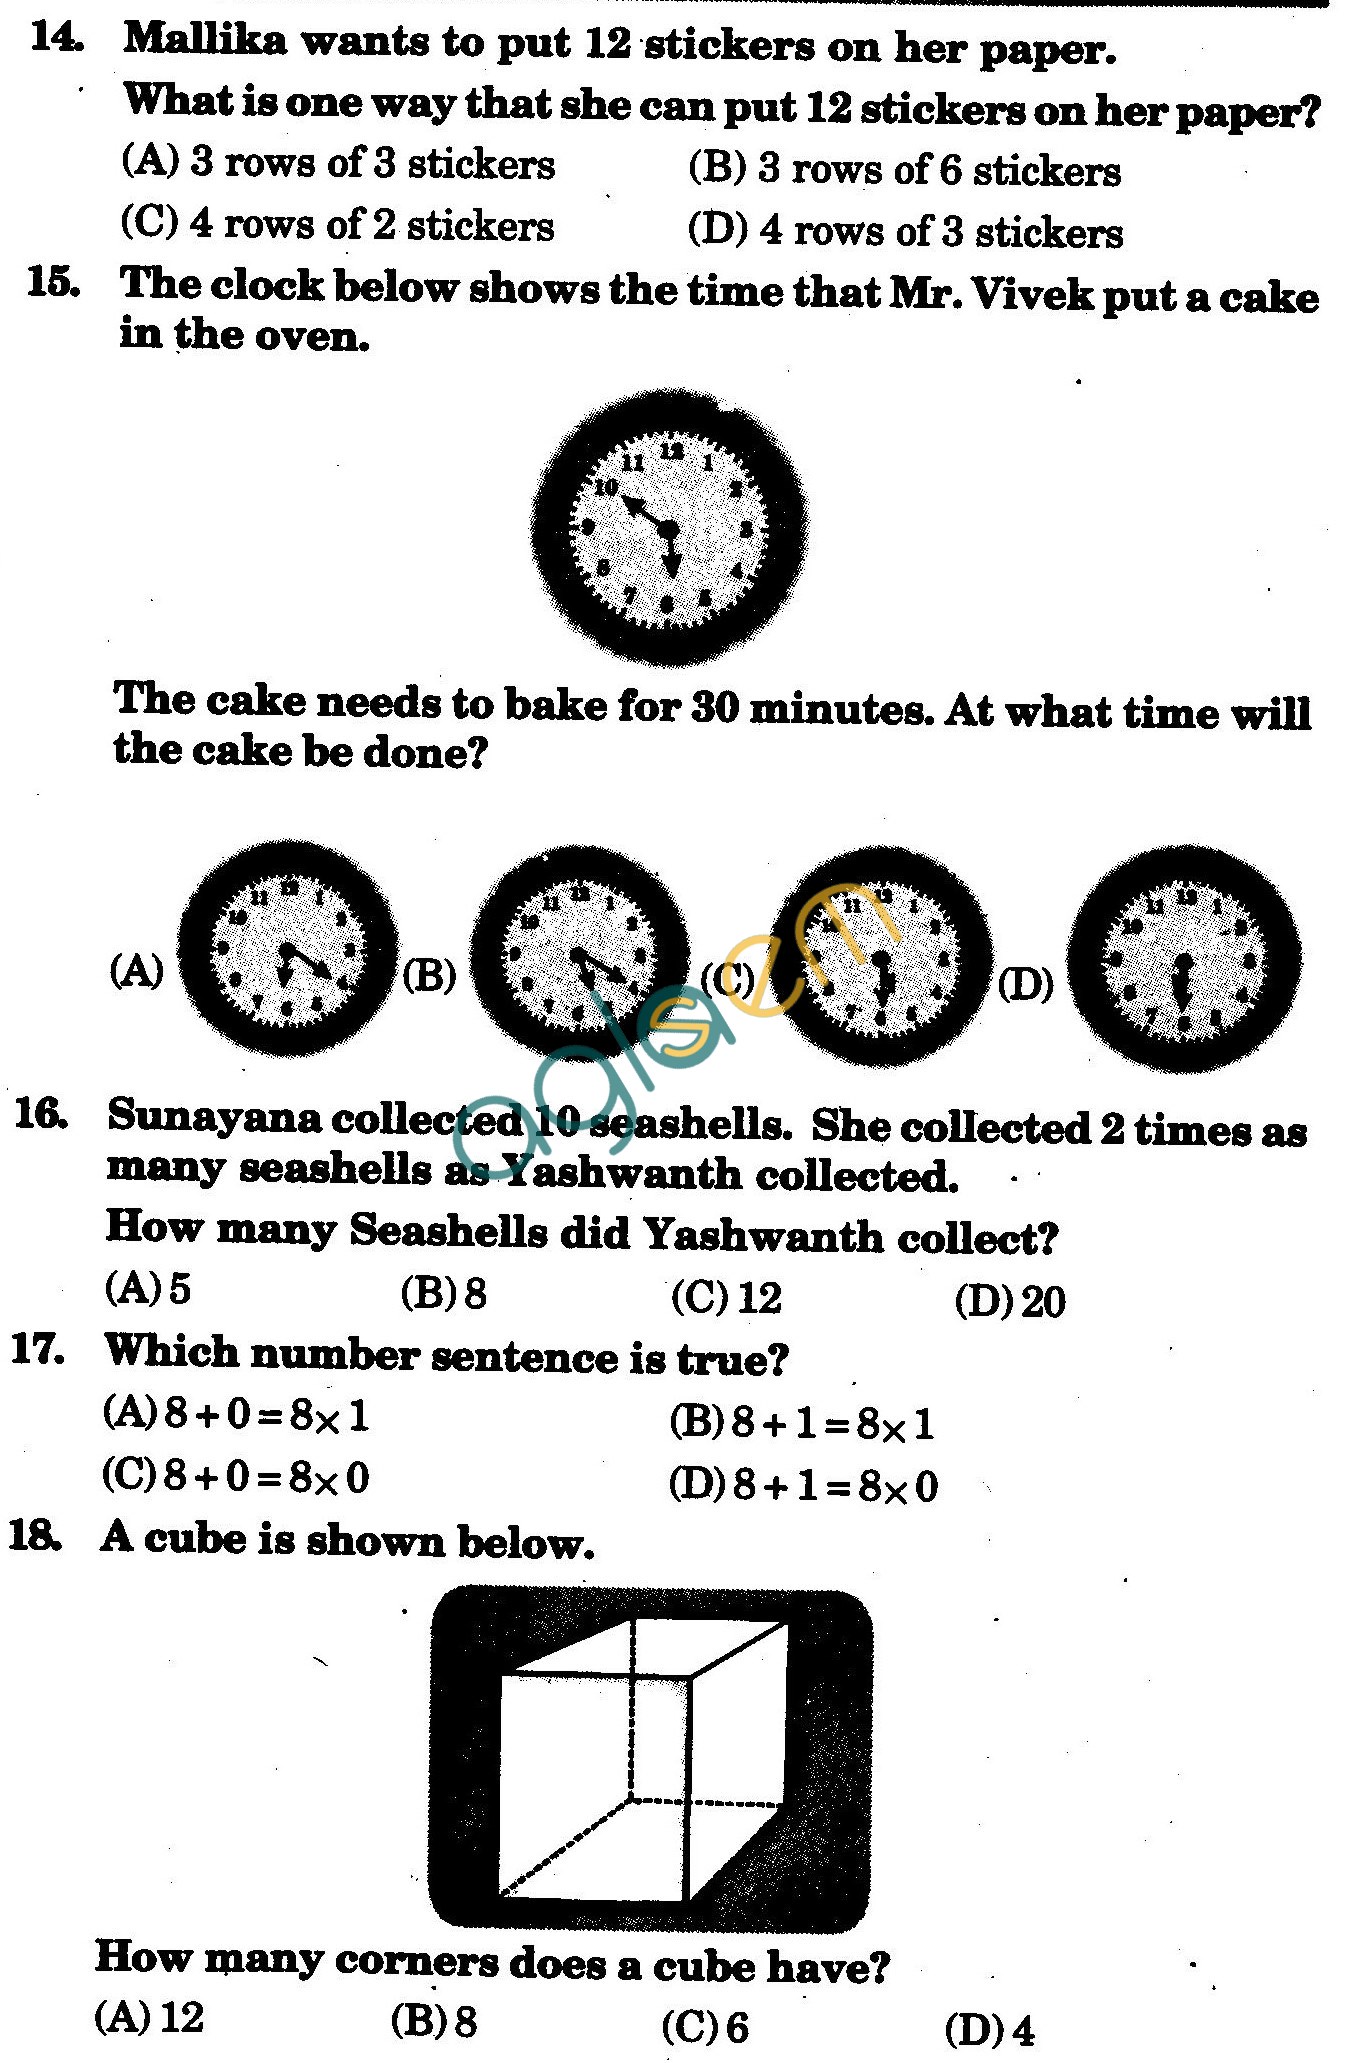 NSTSE 2009 Class III Question Paper with Answers - Mathematics